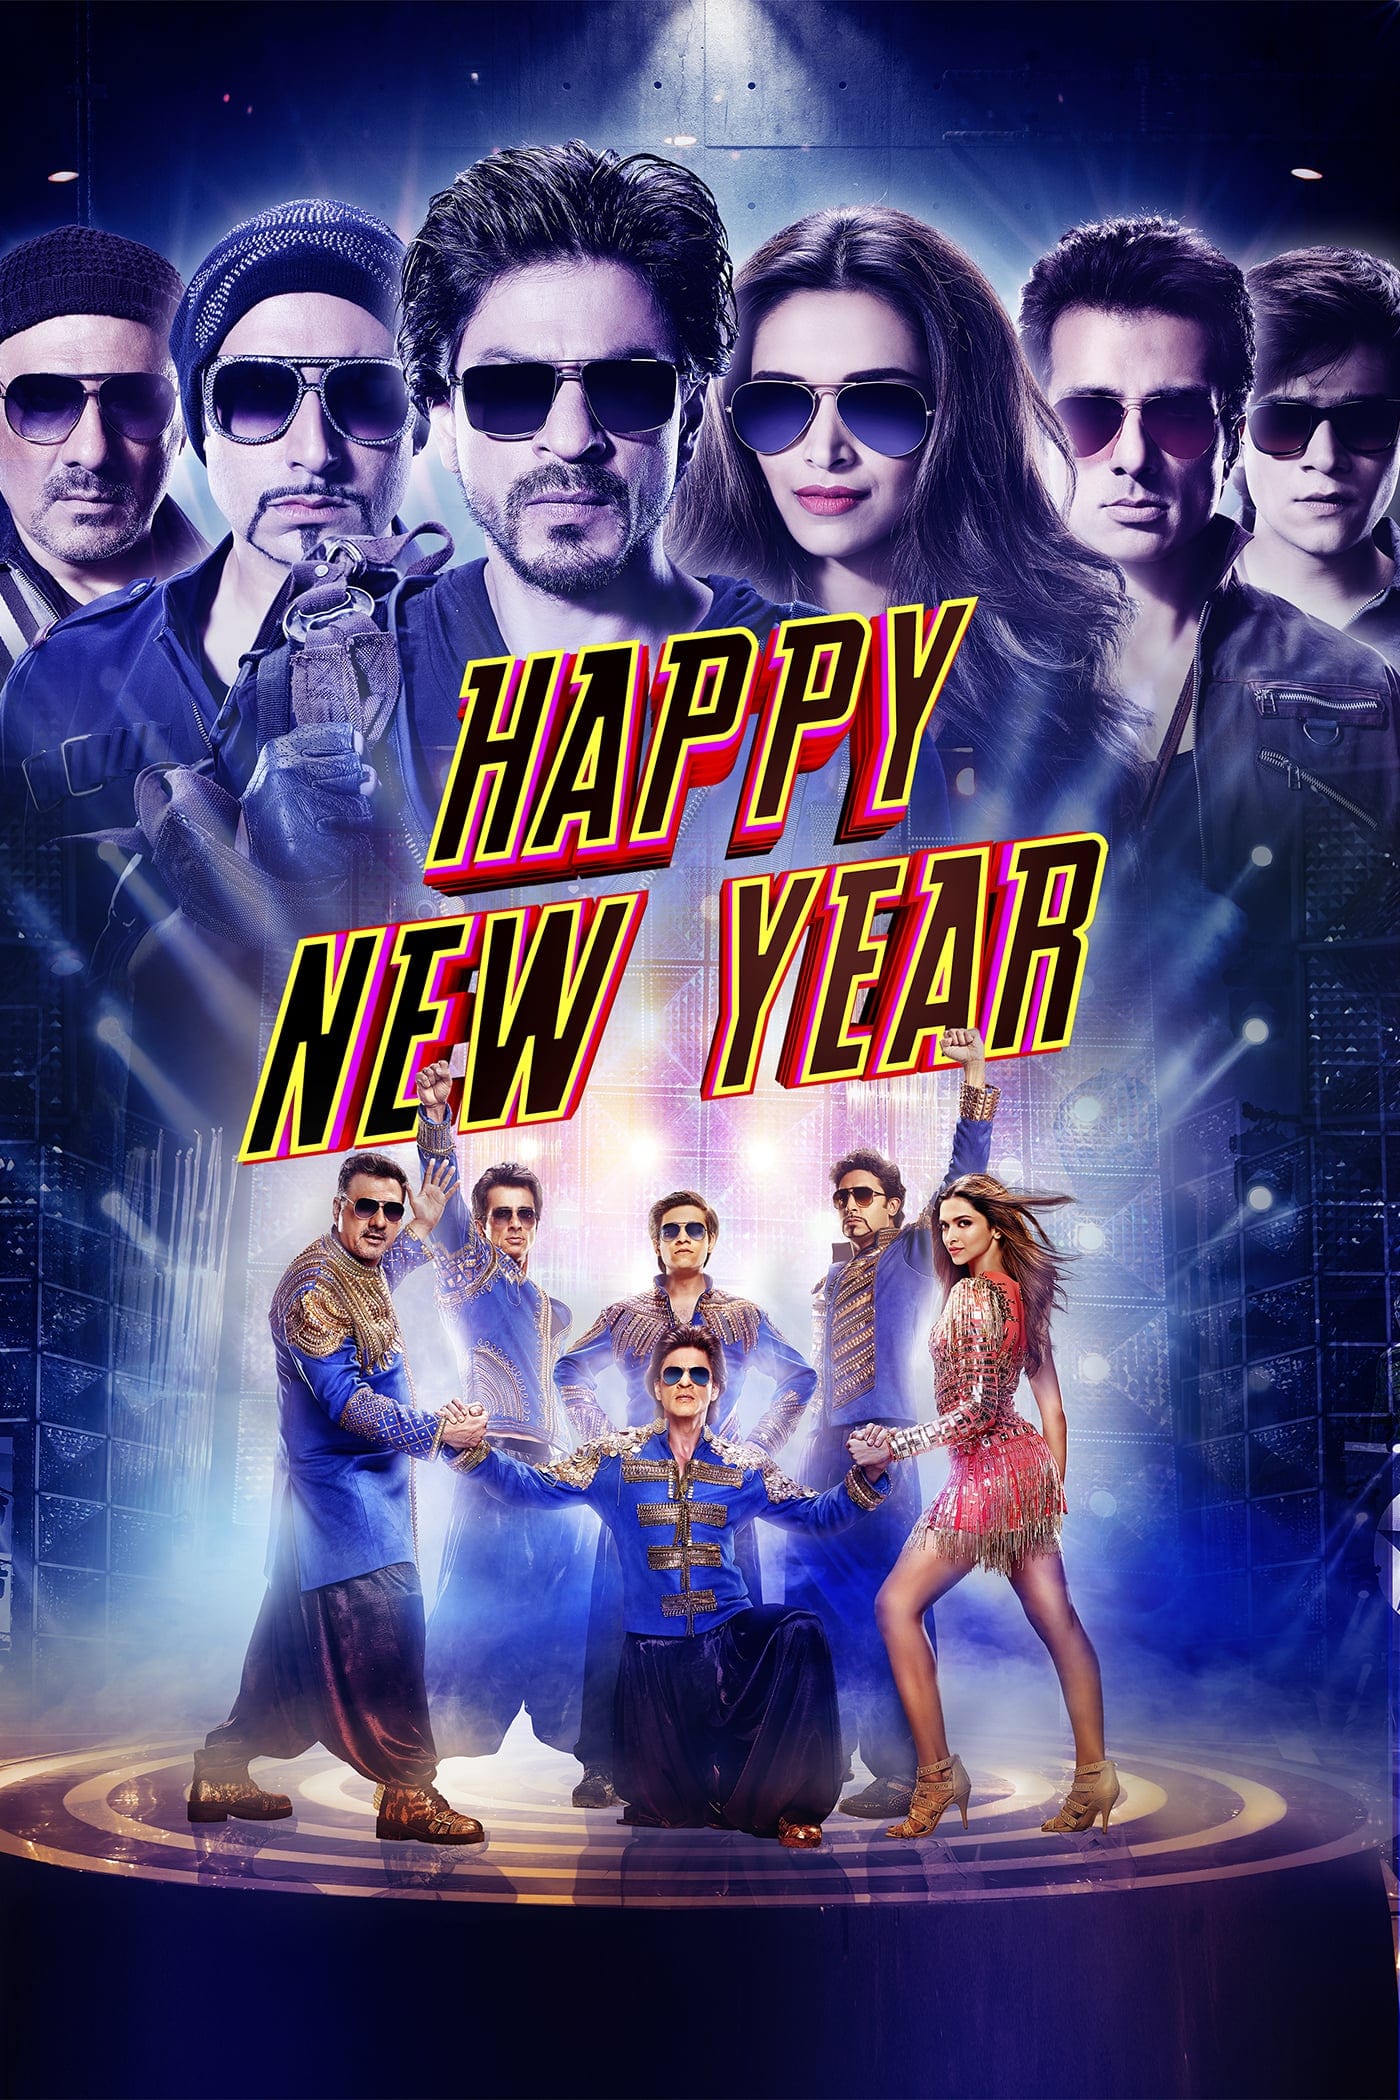 Poster for the movie "Happy New Year"